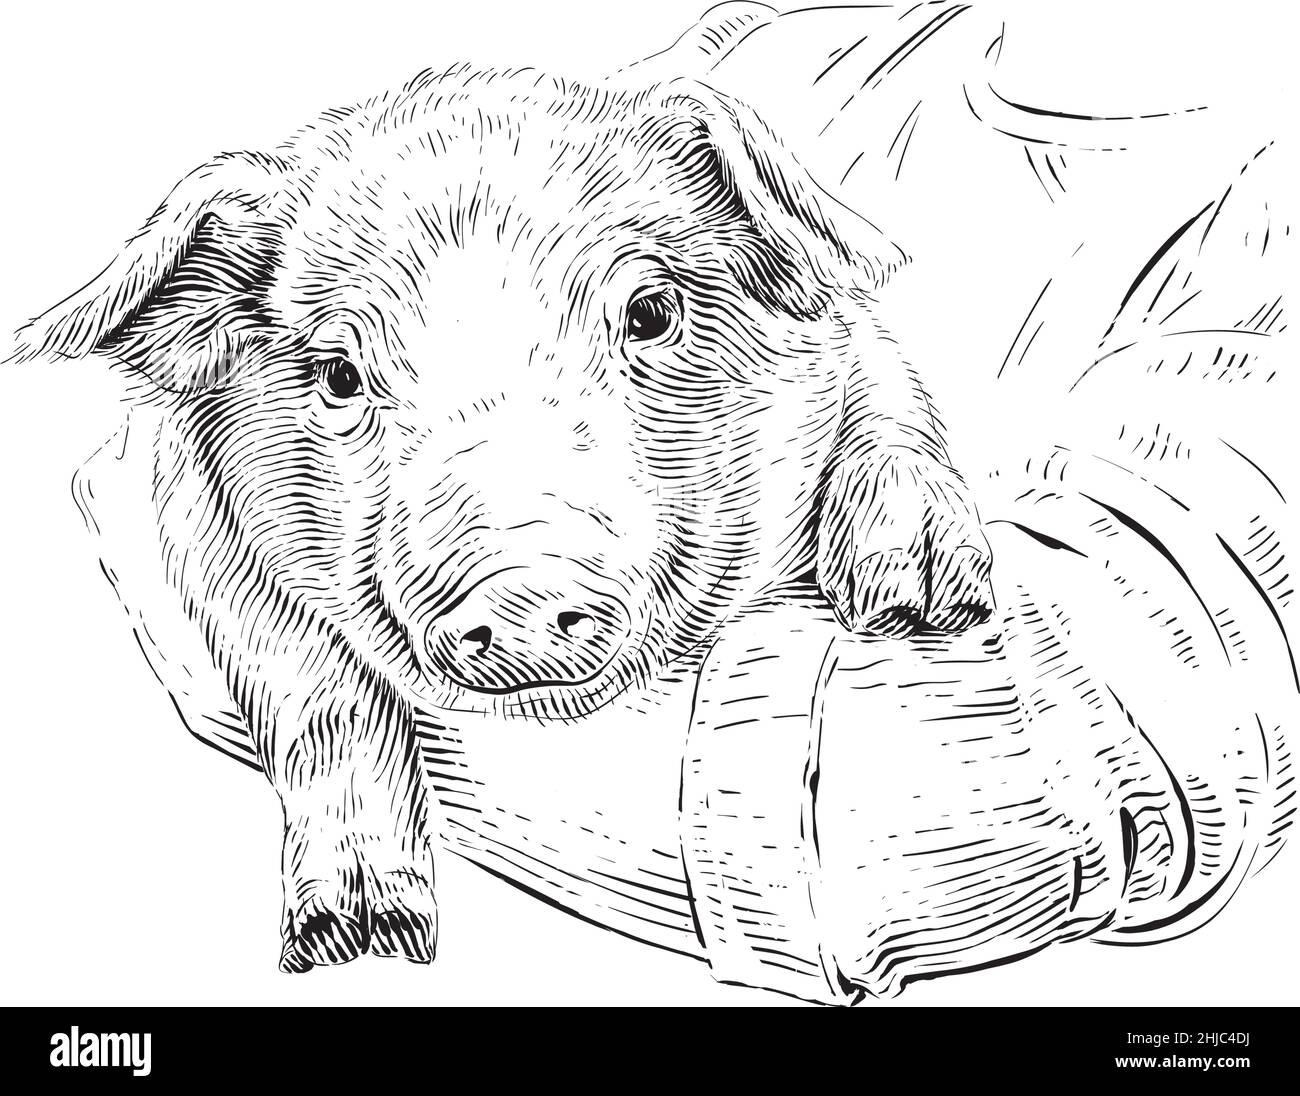 head piglet hand drawing sketch engraving illustration style Stock Vector